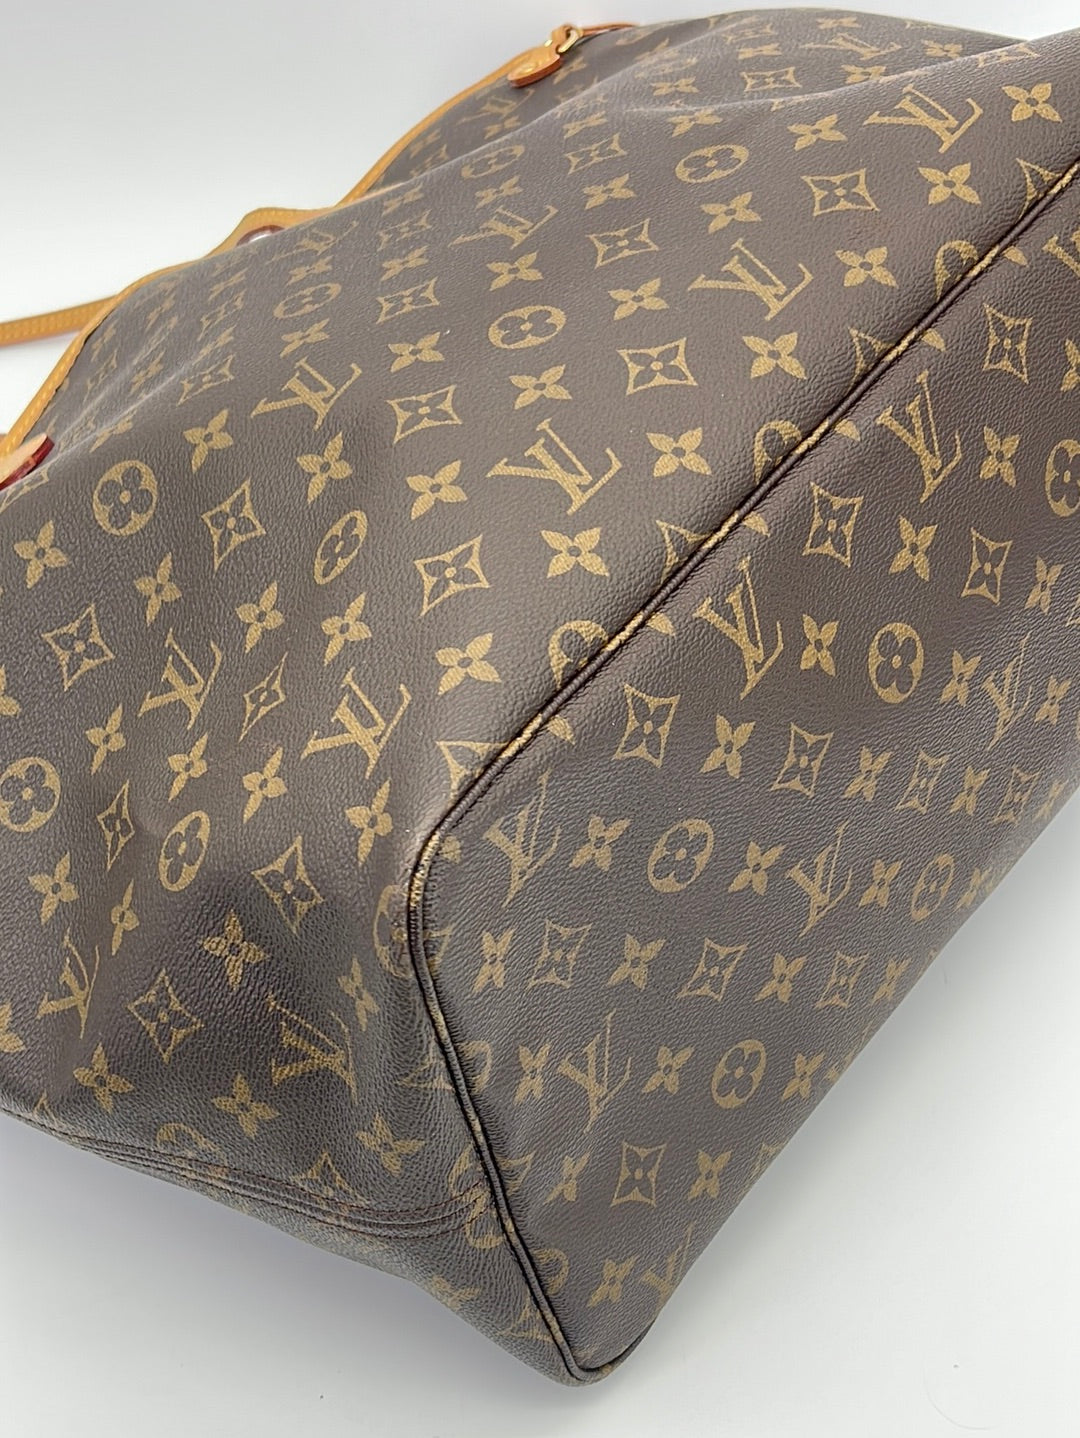 Buy Authentic Pre-owned Louis Vuitton Vintage Monogram Sac Weekend Gm Tote  Bag M42420 No.184 162065 from Japan - Buy authentic Plus exclusive items  from Japan